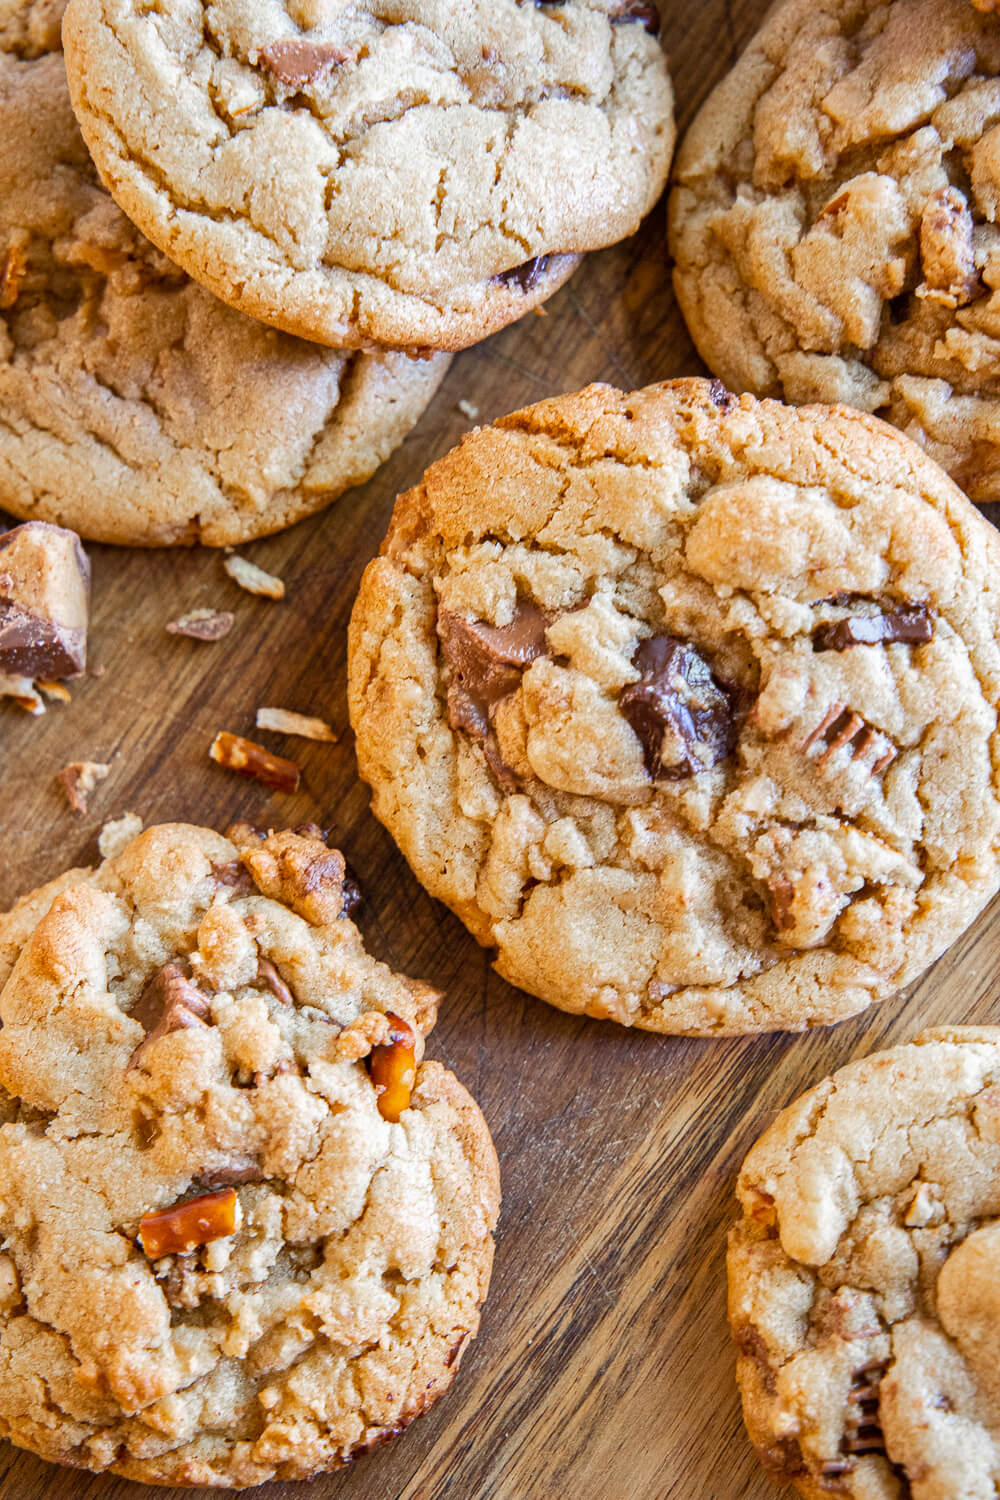 These brown butter cookies with chocolate chips toffee bits are amazing! Make them even better by adding pretzel pieces and chopped up Reese's peanut butter cups. These care such a hit! They are soft and chewy and full of flavor and yummy textures.